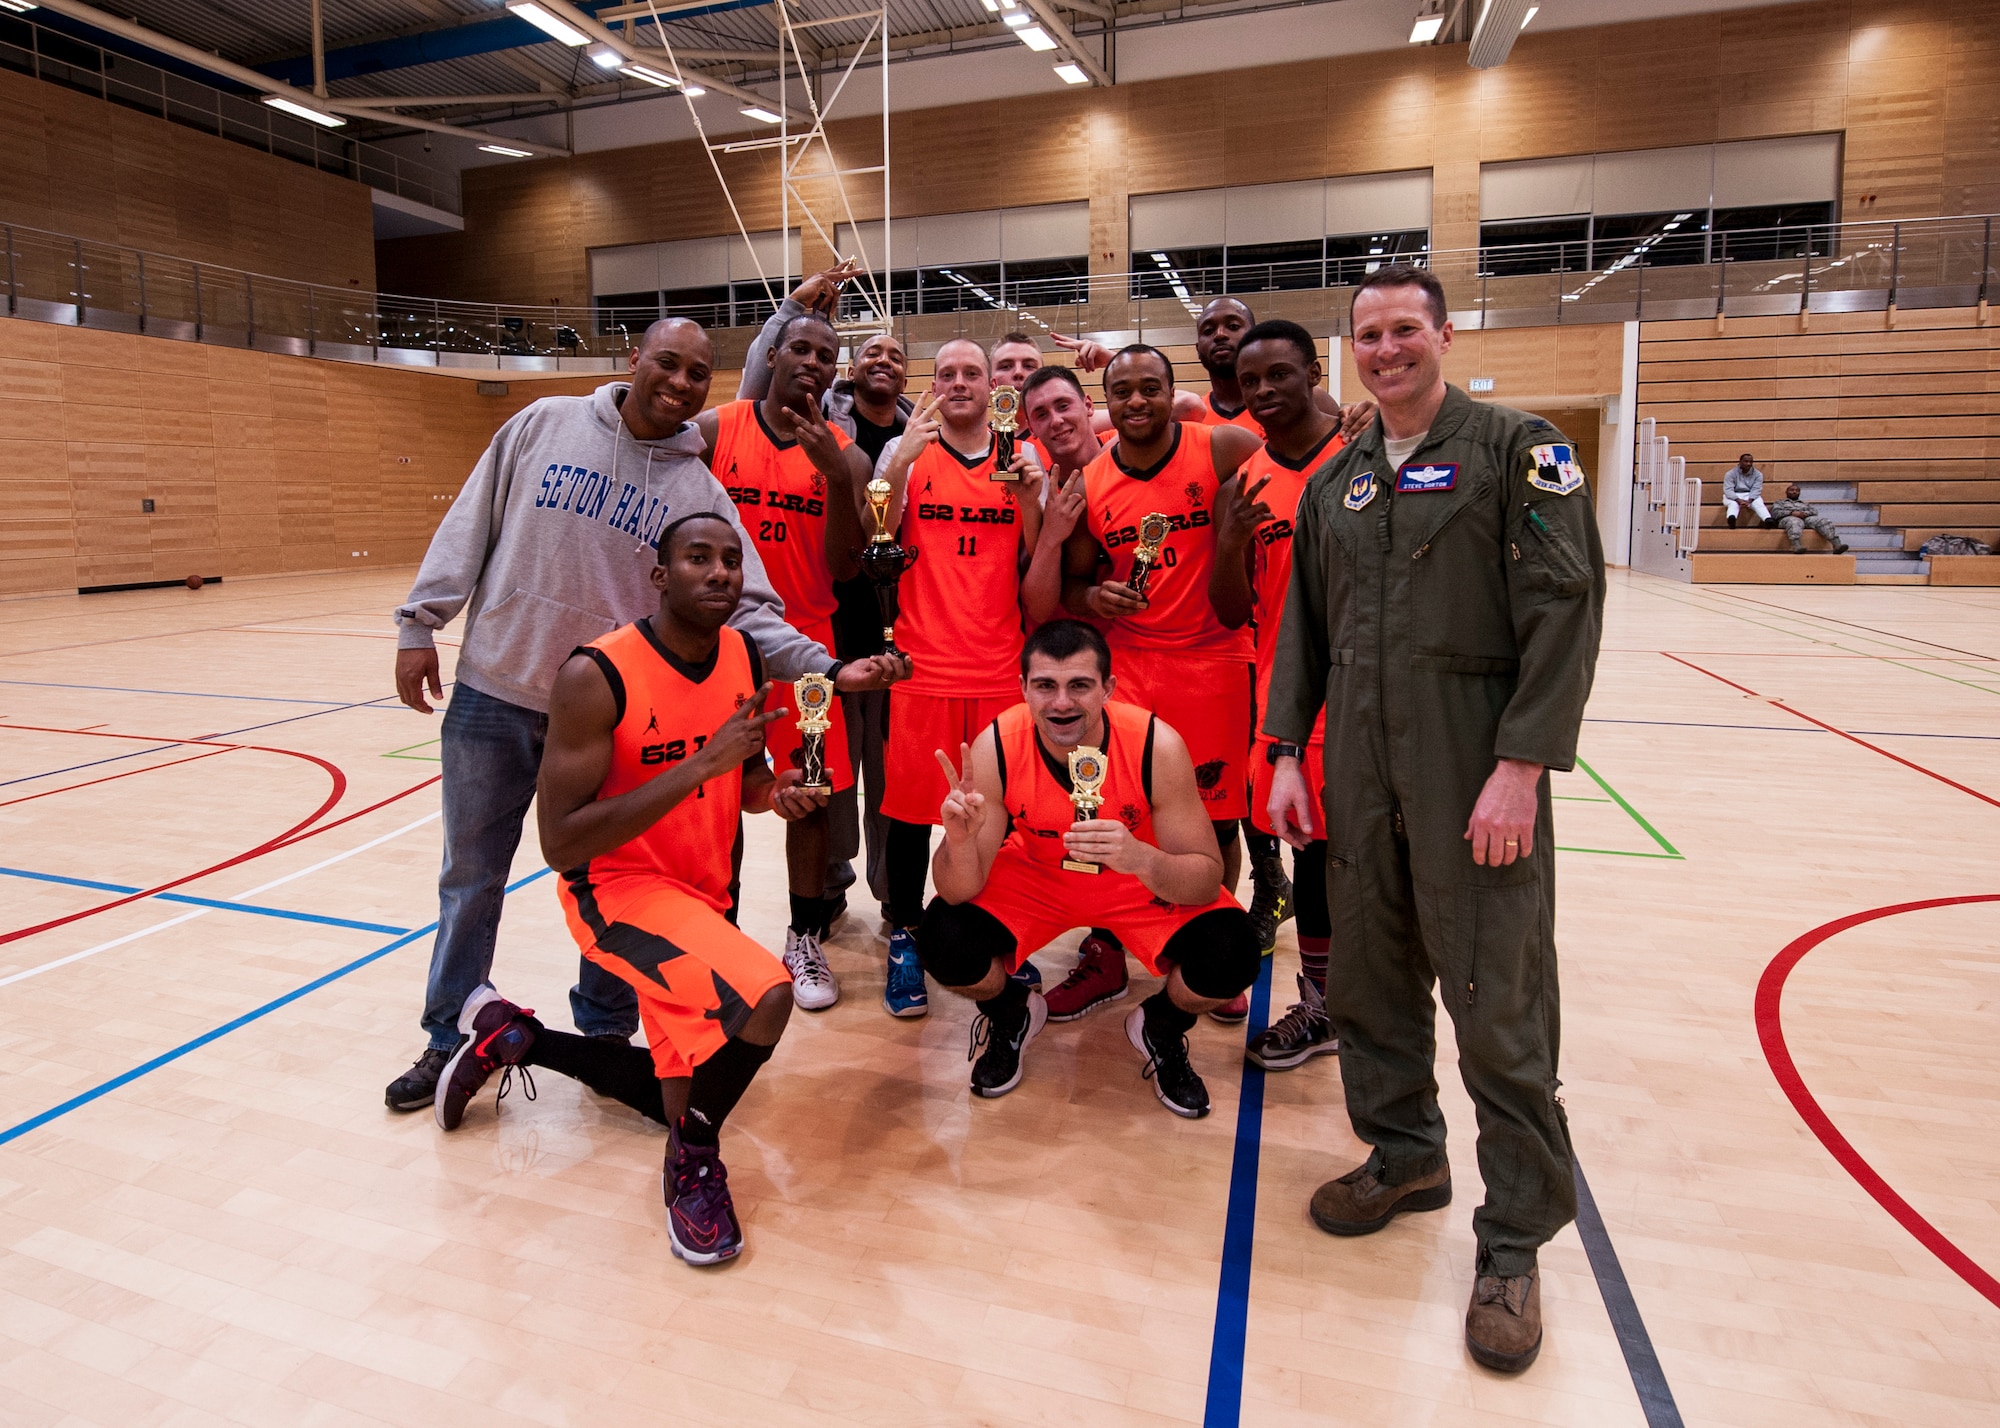 Leadership from the 52nd Fighter Wing pose for a photo with the 52nd Logistics Readiness Squadron intramural basketball team after winning the Intramural Basketball Championship game inside the George Price Gymnasium Jan. 28, 2016, at Spangdahlem Air Base, Germany. The game came down to a last second missed basket and ended with the 52nd LRS intramural basketball team winning the game with a final score of 54-52. (U.S. Air Force photo by Senior Airman Rusty Frank/Released)